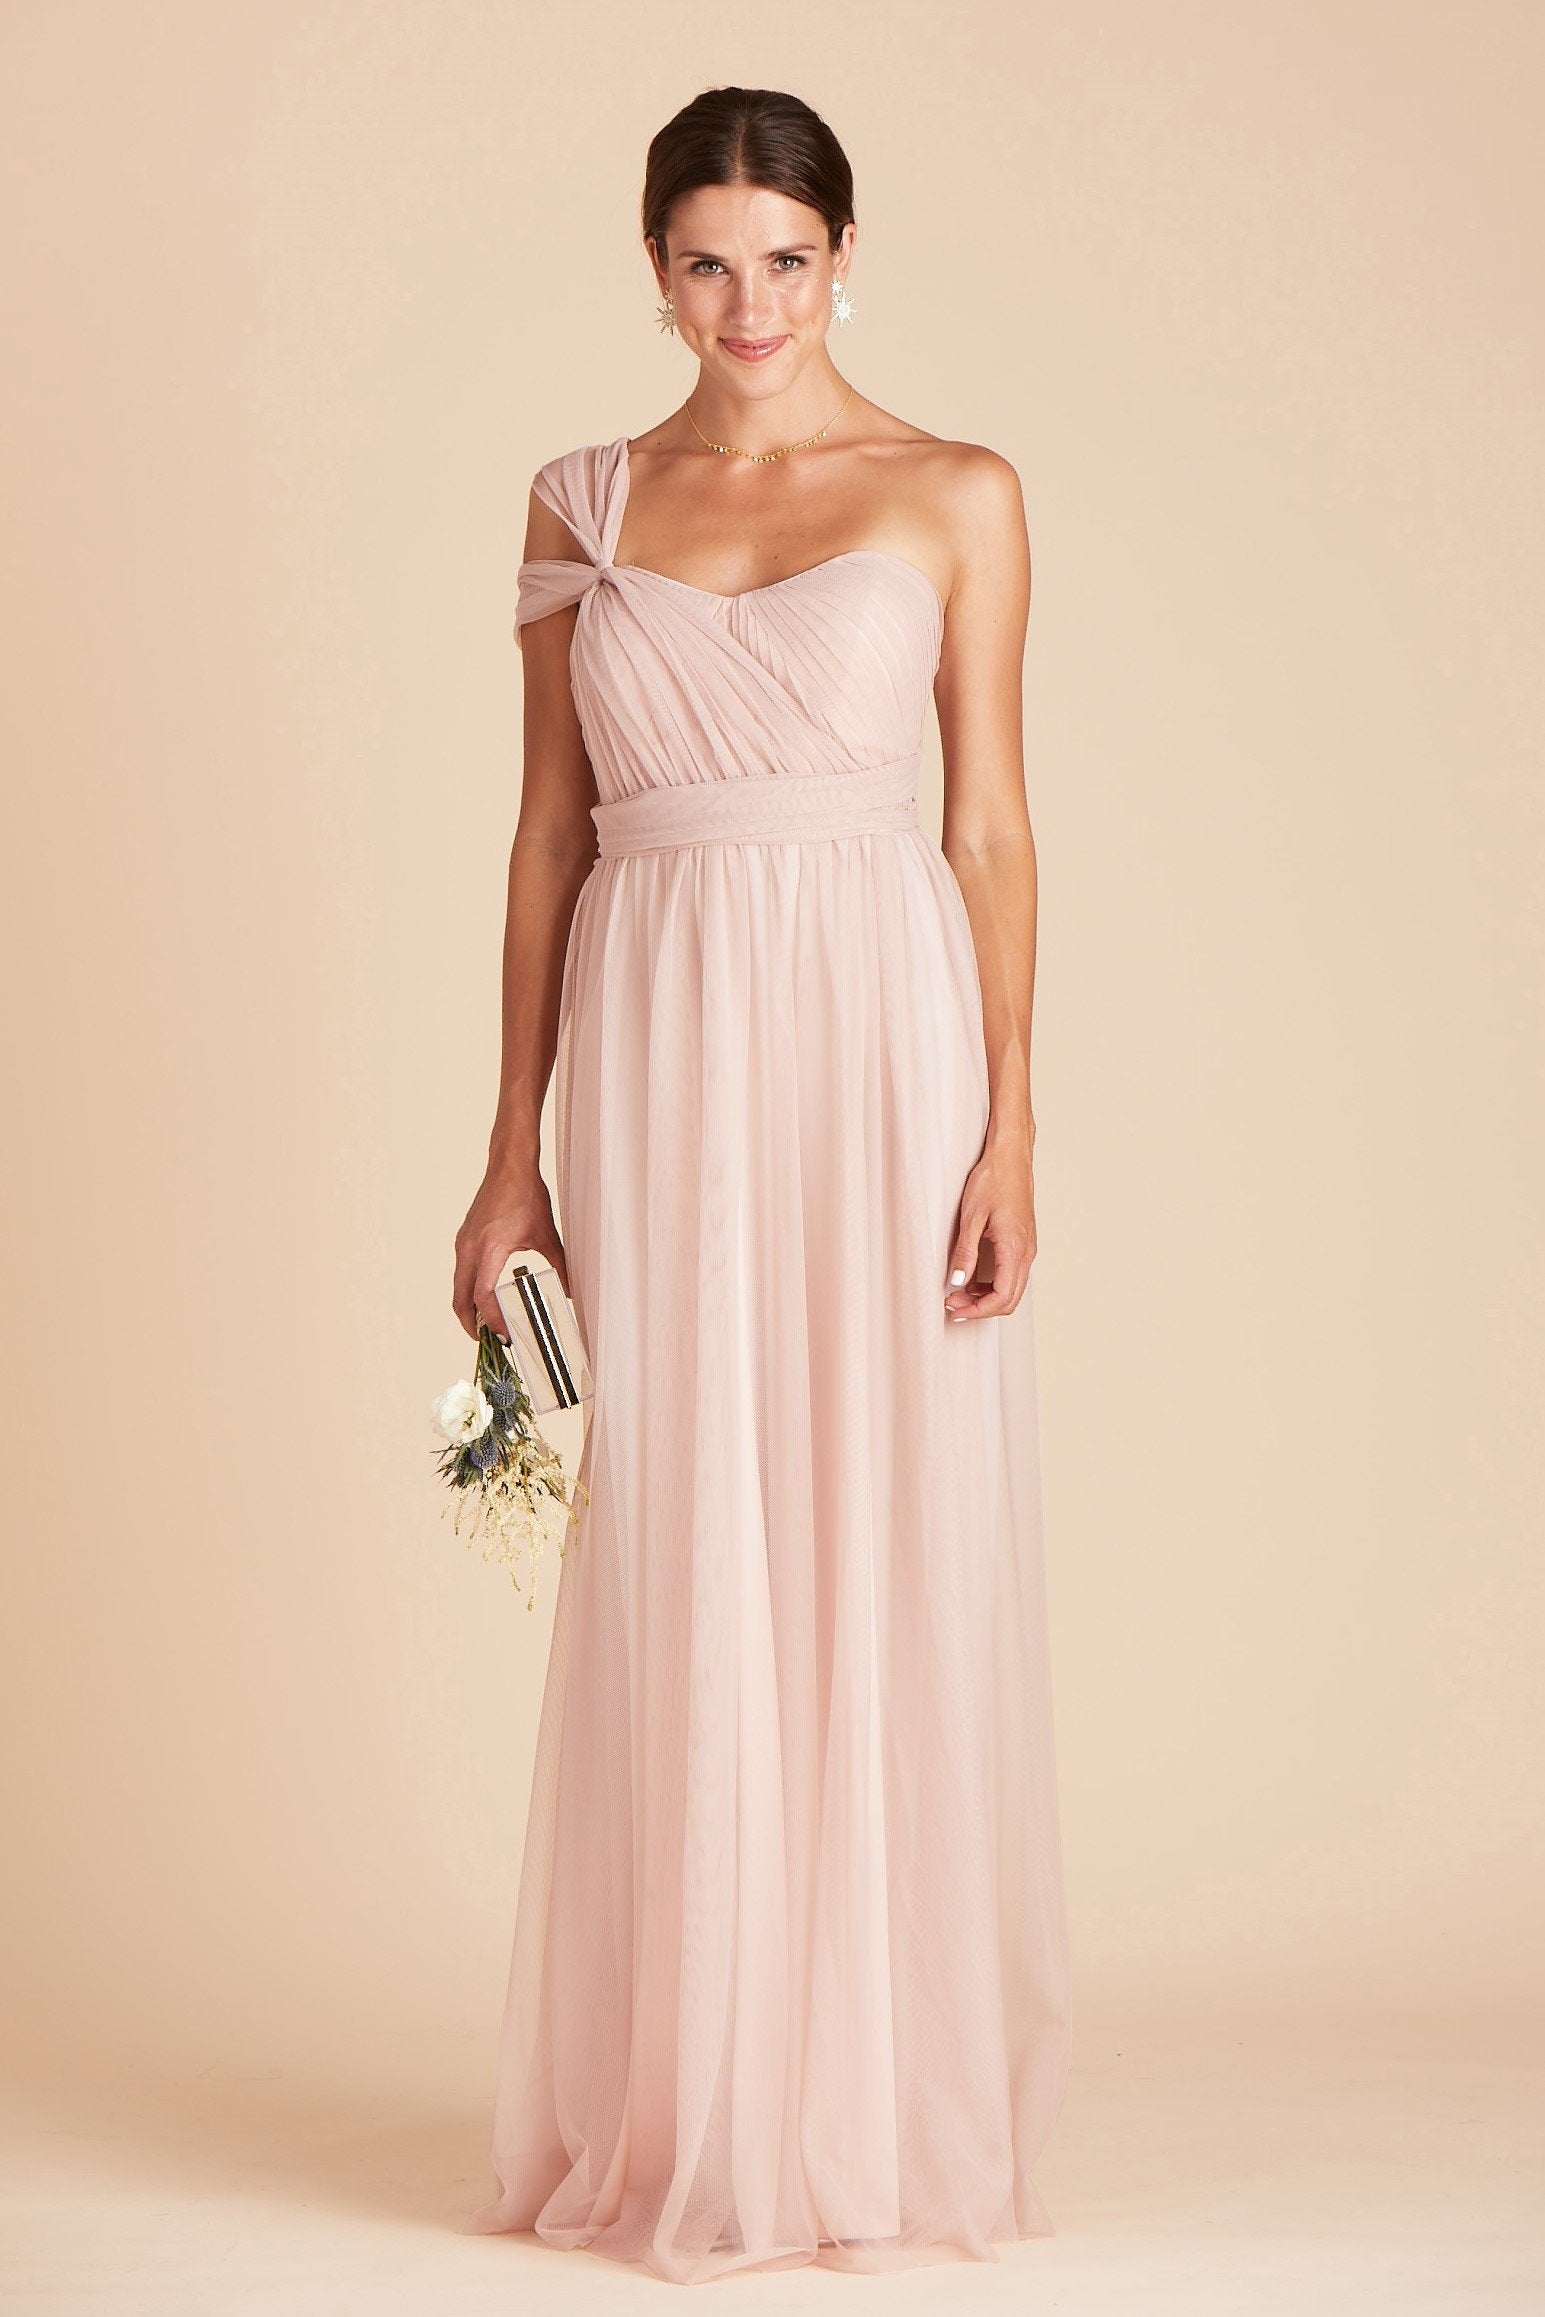 Christina convertible bridesmaid dress in vintage blush tulle by Birdy Grey, front view